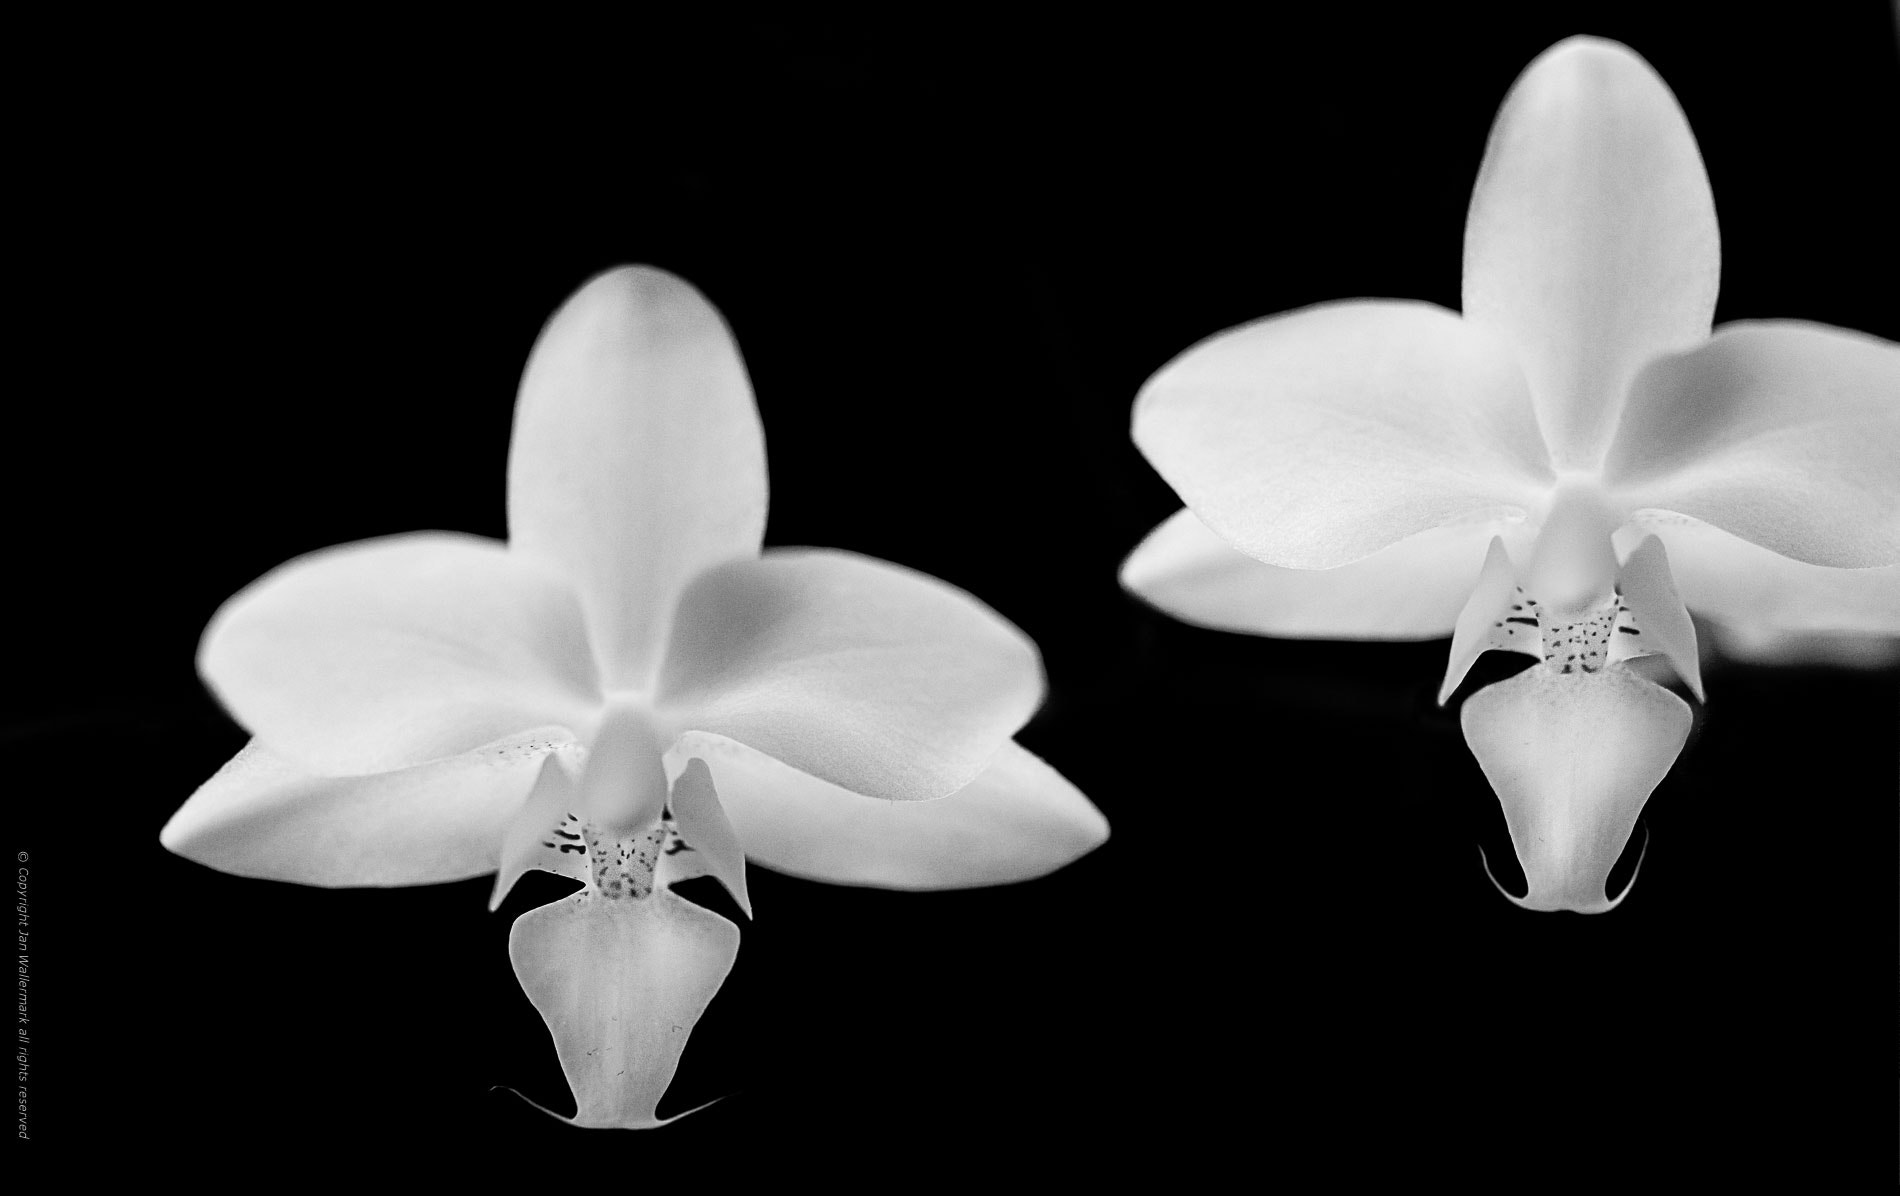 Nikon D500 + Nikon AF-S DX Nikkor 18-55mm F3.5-5.6G II sample photo. A hommage to the orchid vlll photography